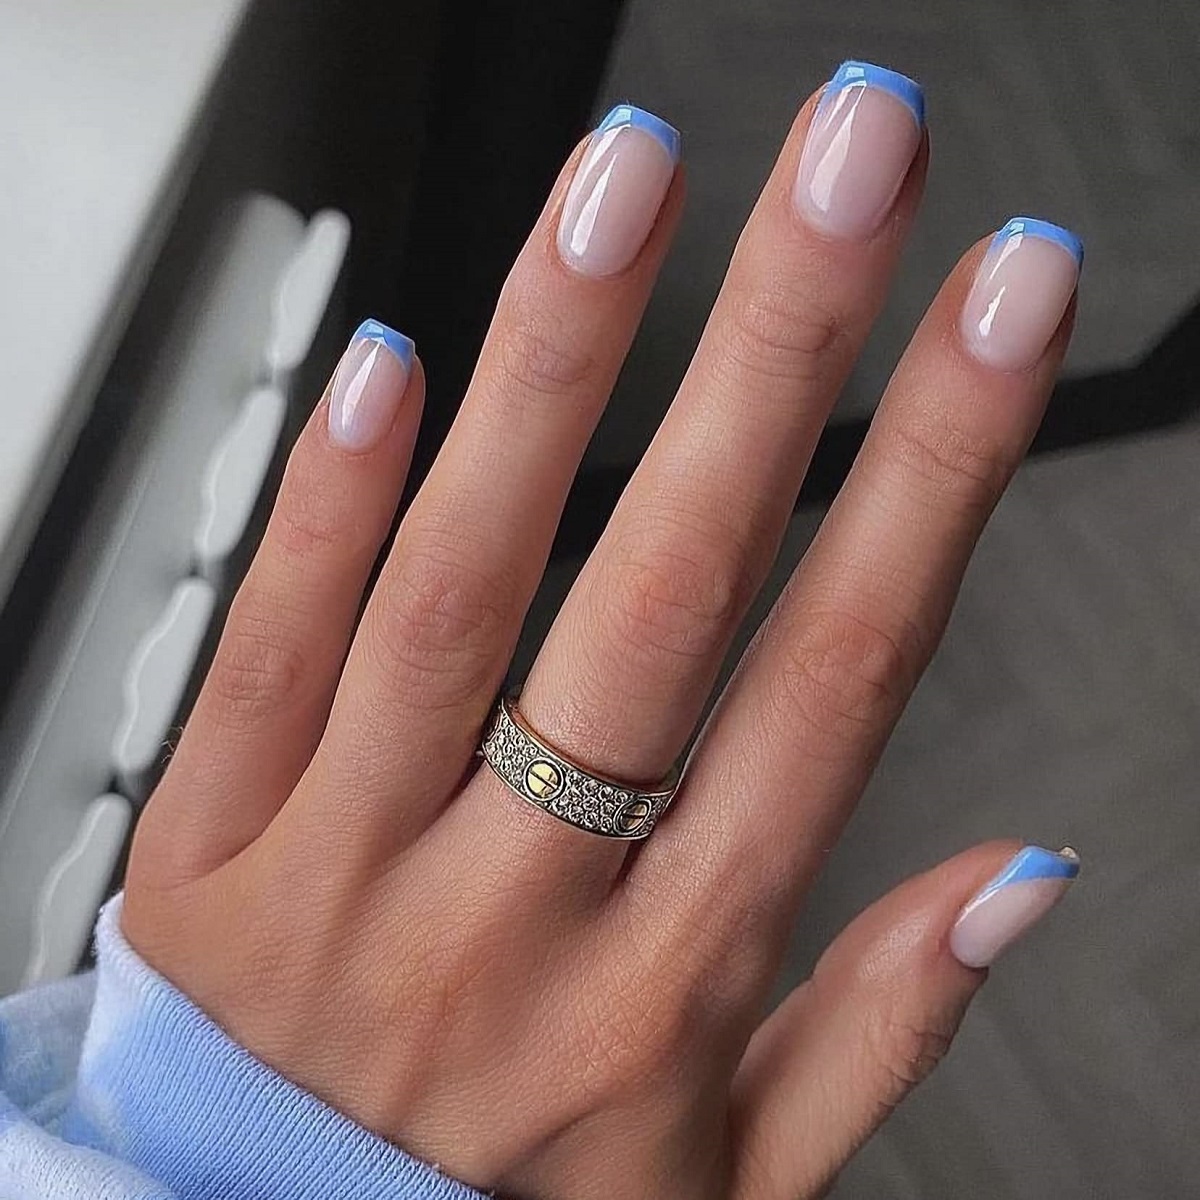 Squoval Nails